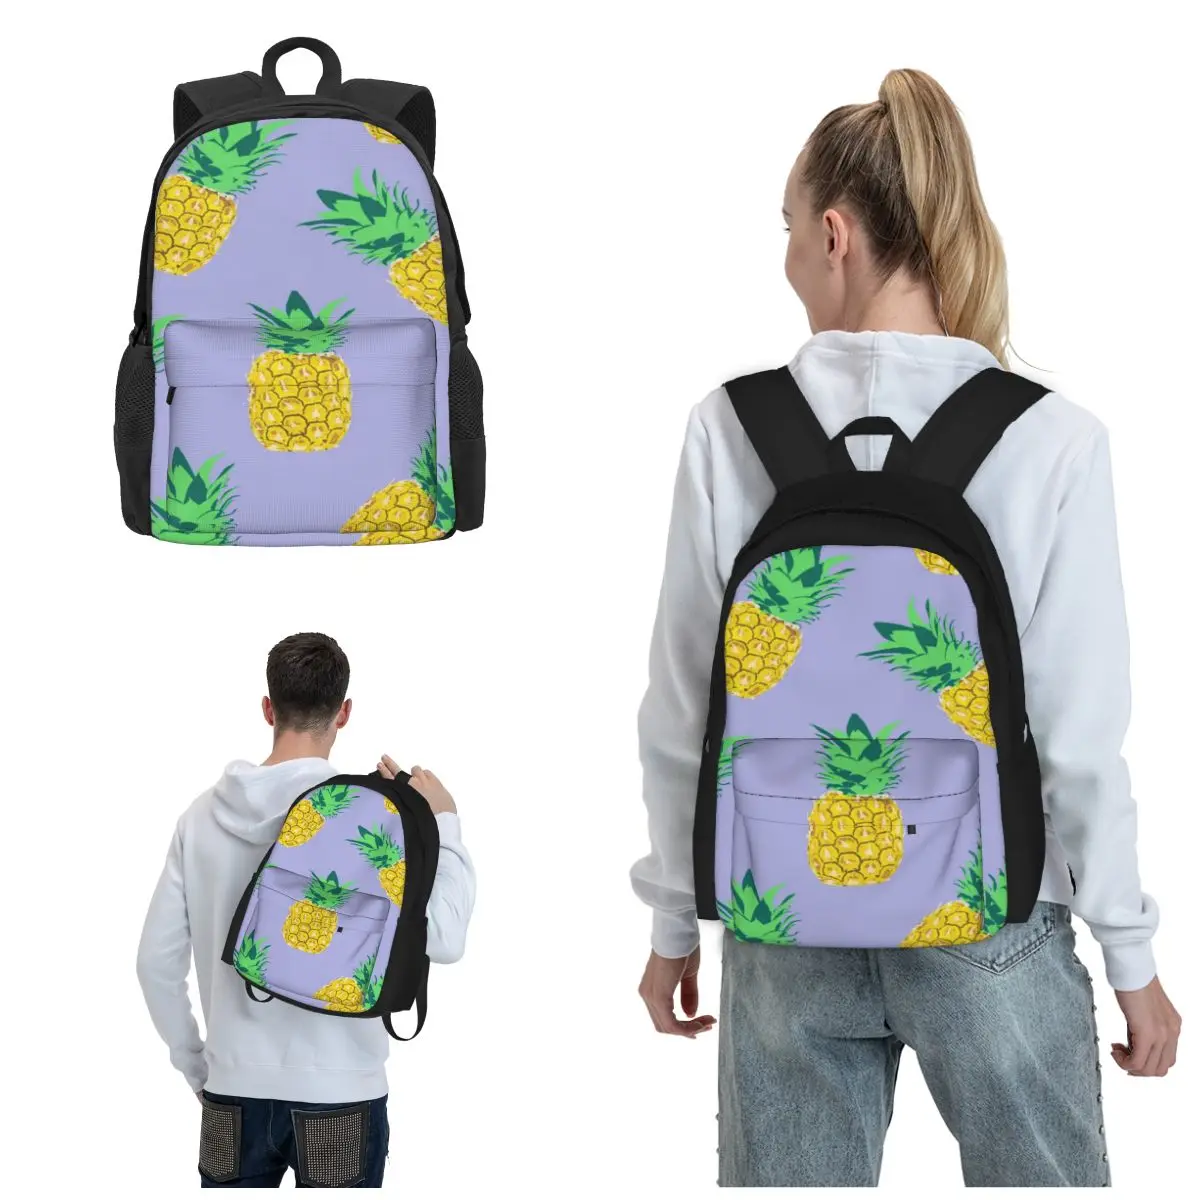 

Pineapple Avocado Step Out In Style With Our Fashion-Forward And Functional Backpacks School Backpack Teens Bookbag Lightweight